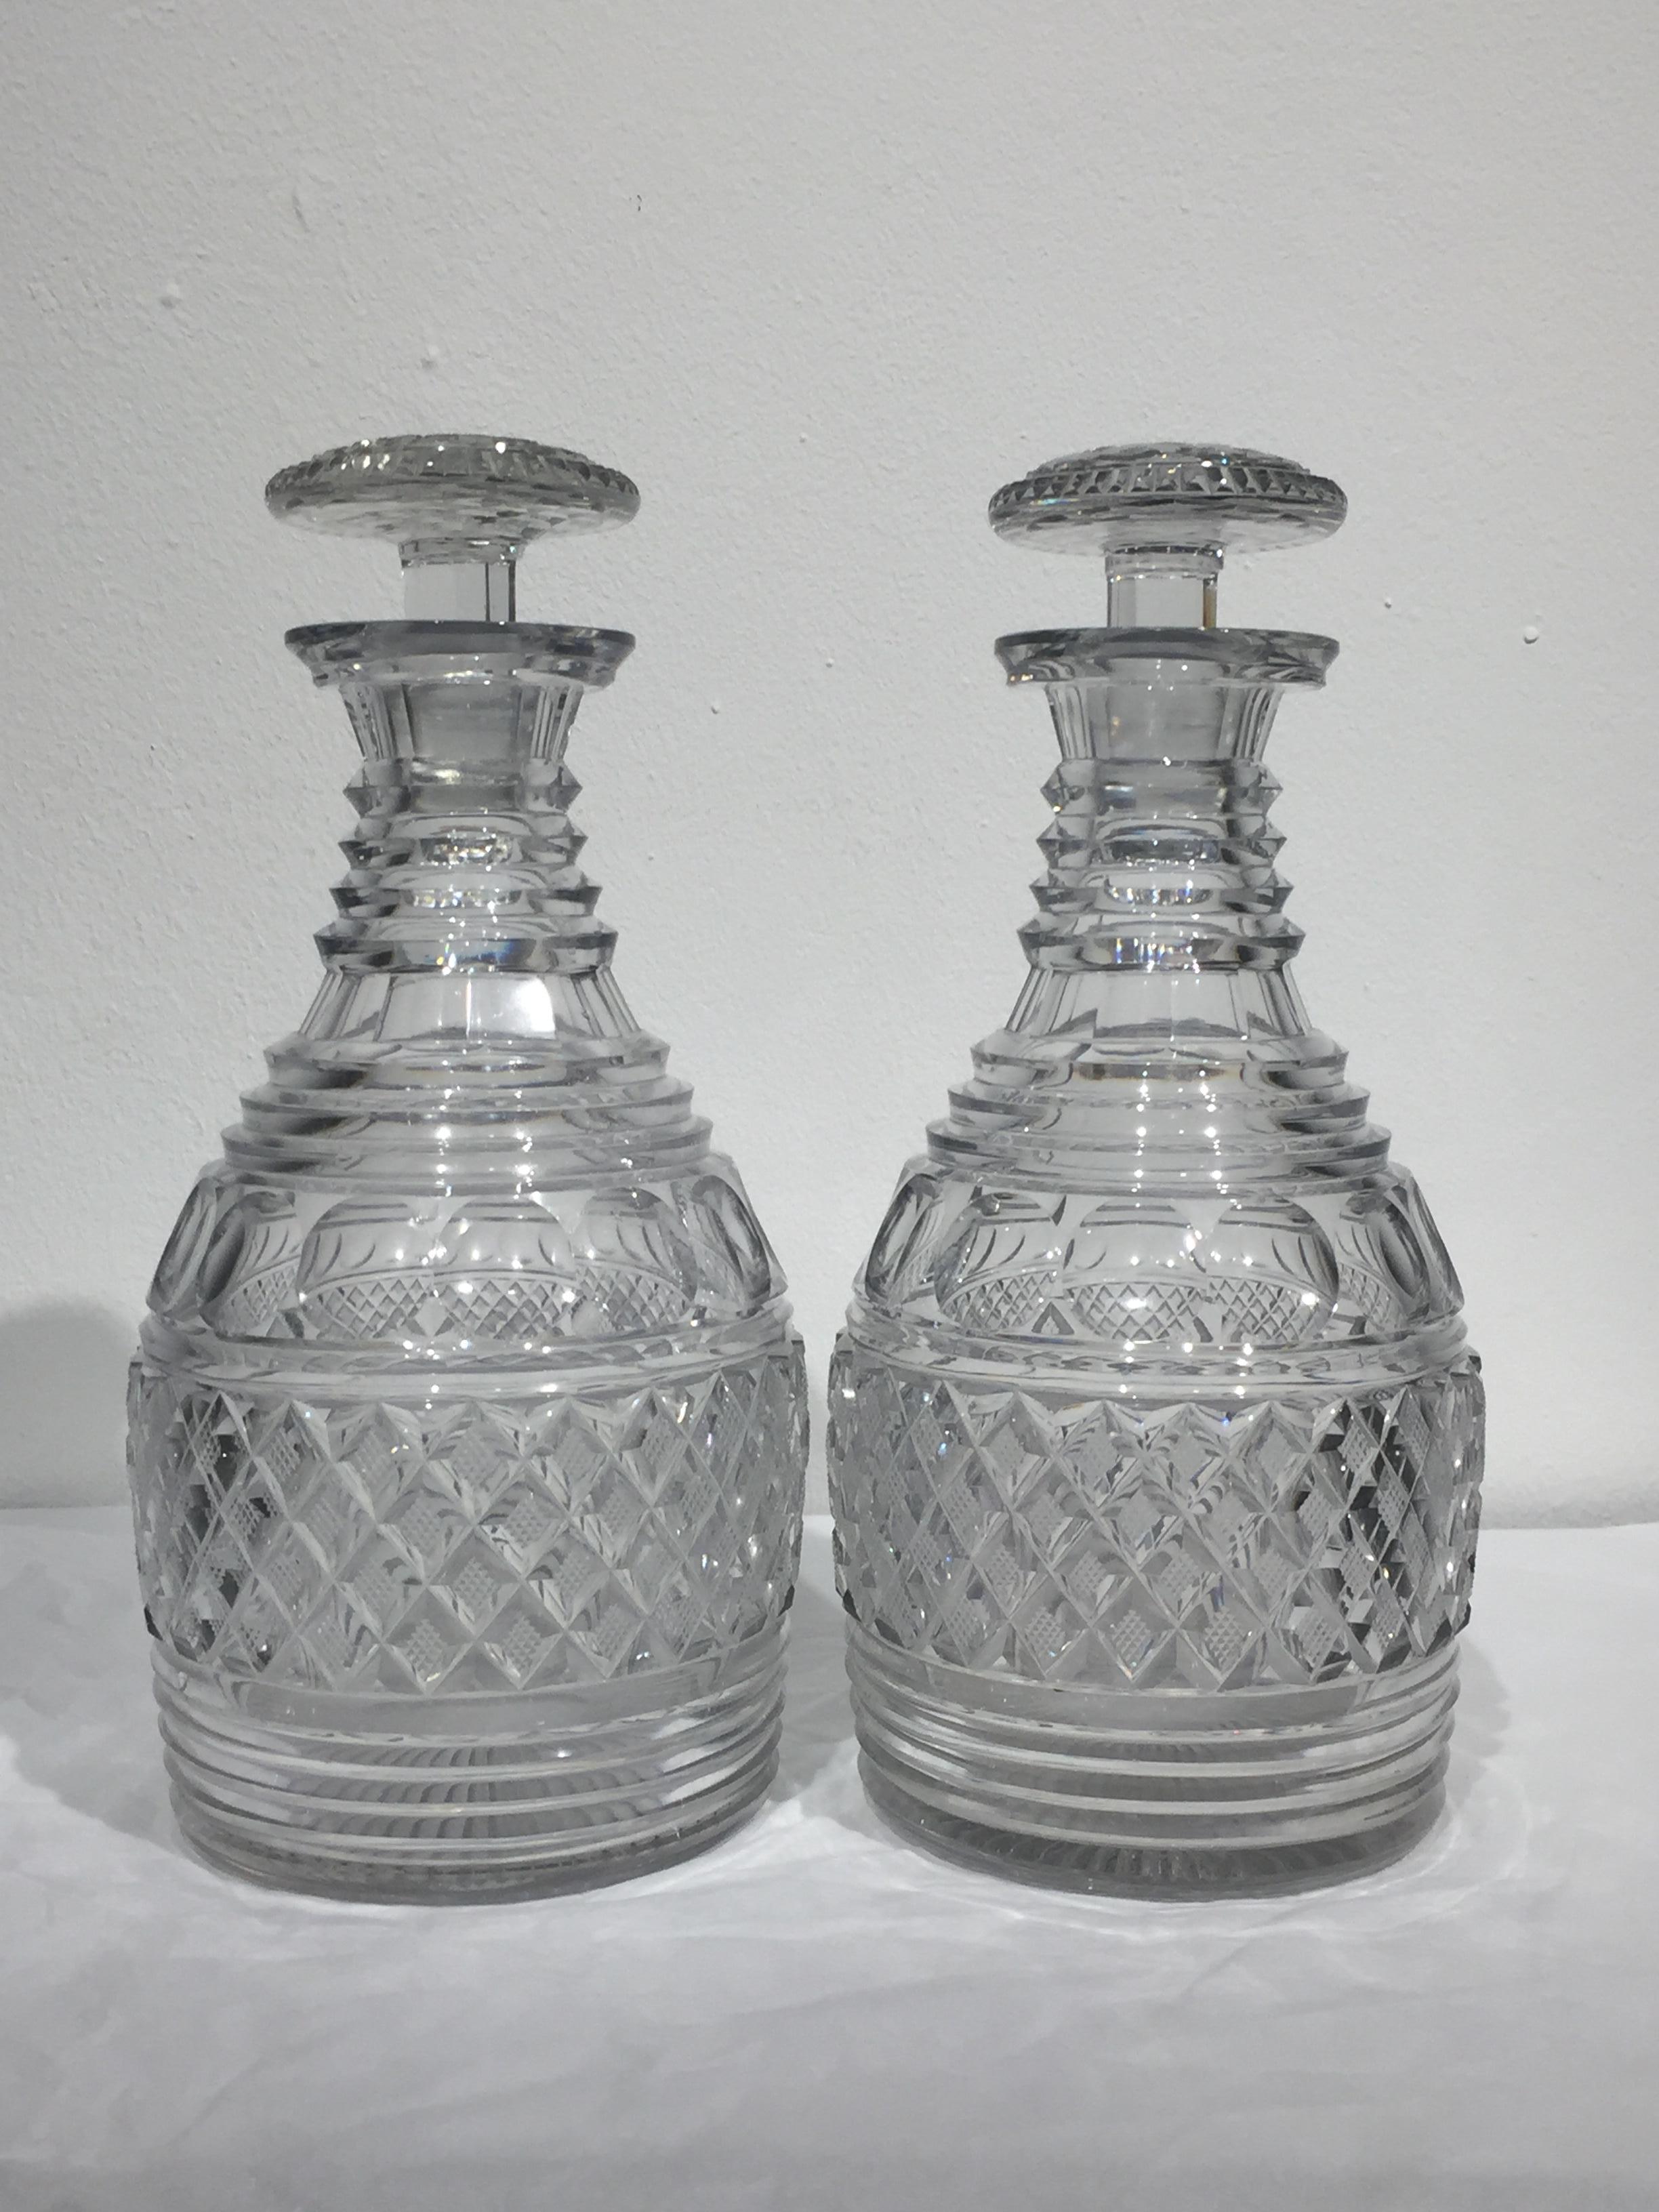 A superb pair of English Regency period cut crystal decanters of the finest quality retaining their original stoppers.
The stoppers with hobnail centres and cross cut edges over faceted stems, the decanters with step rings, panels, facet cut